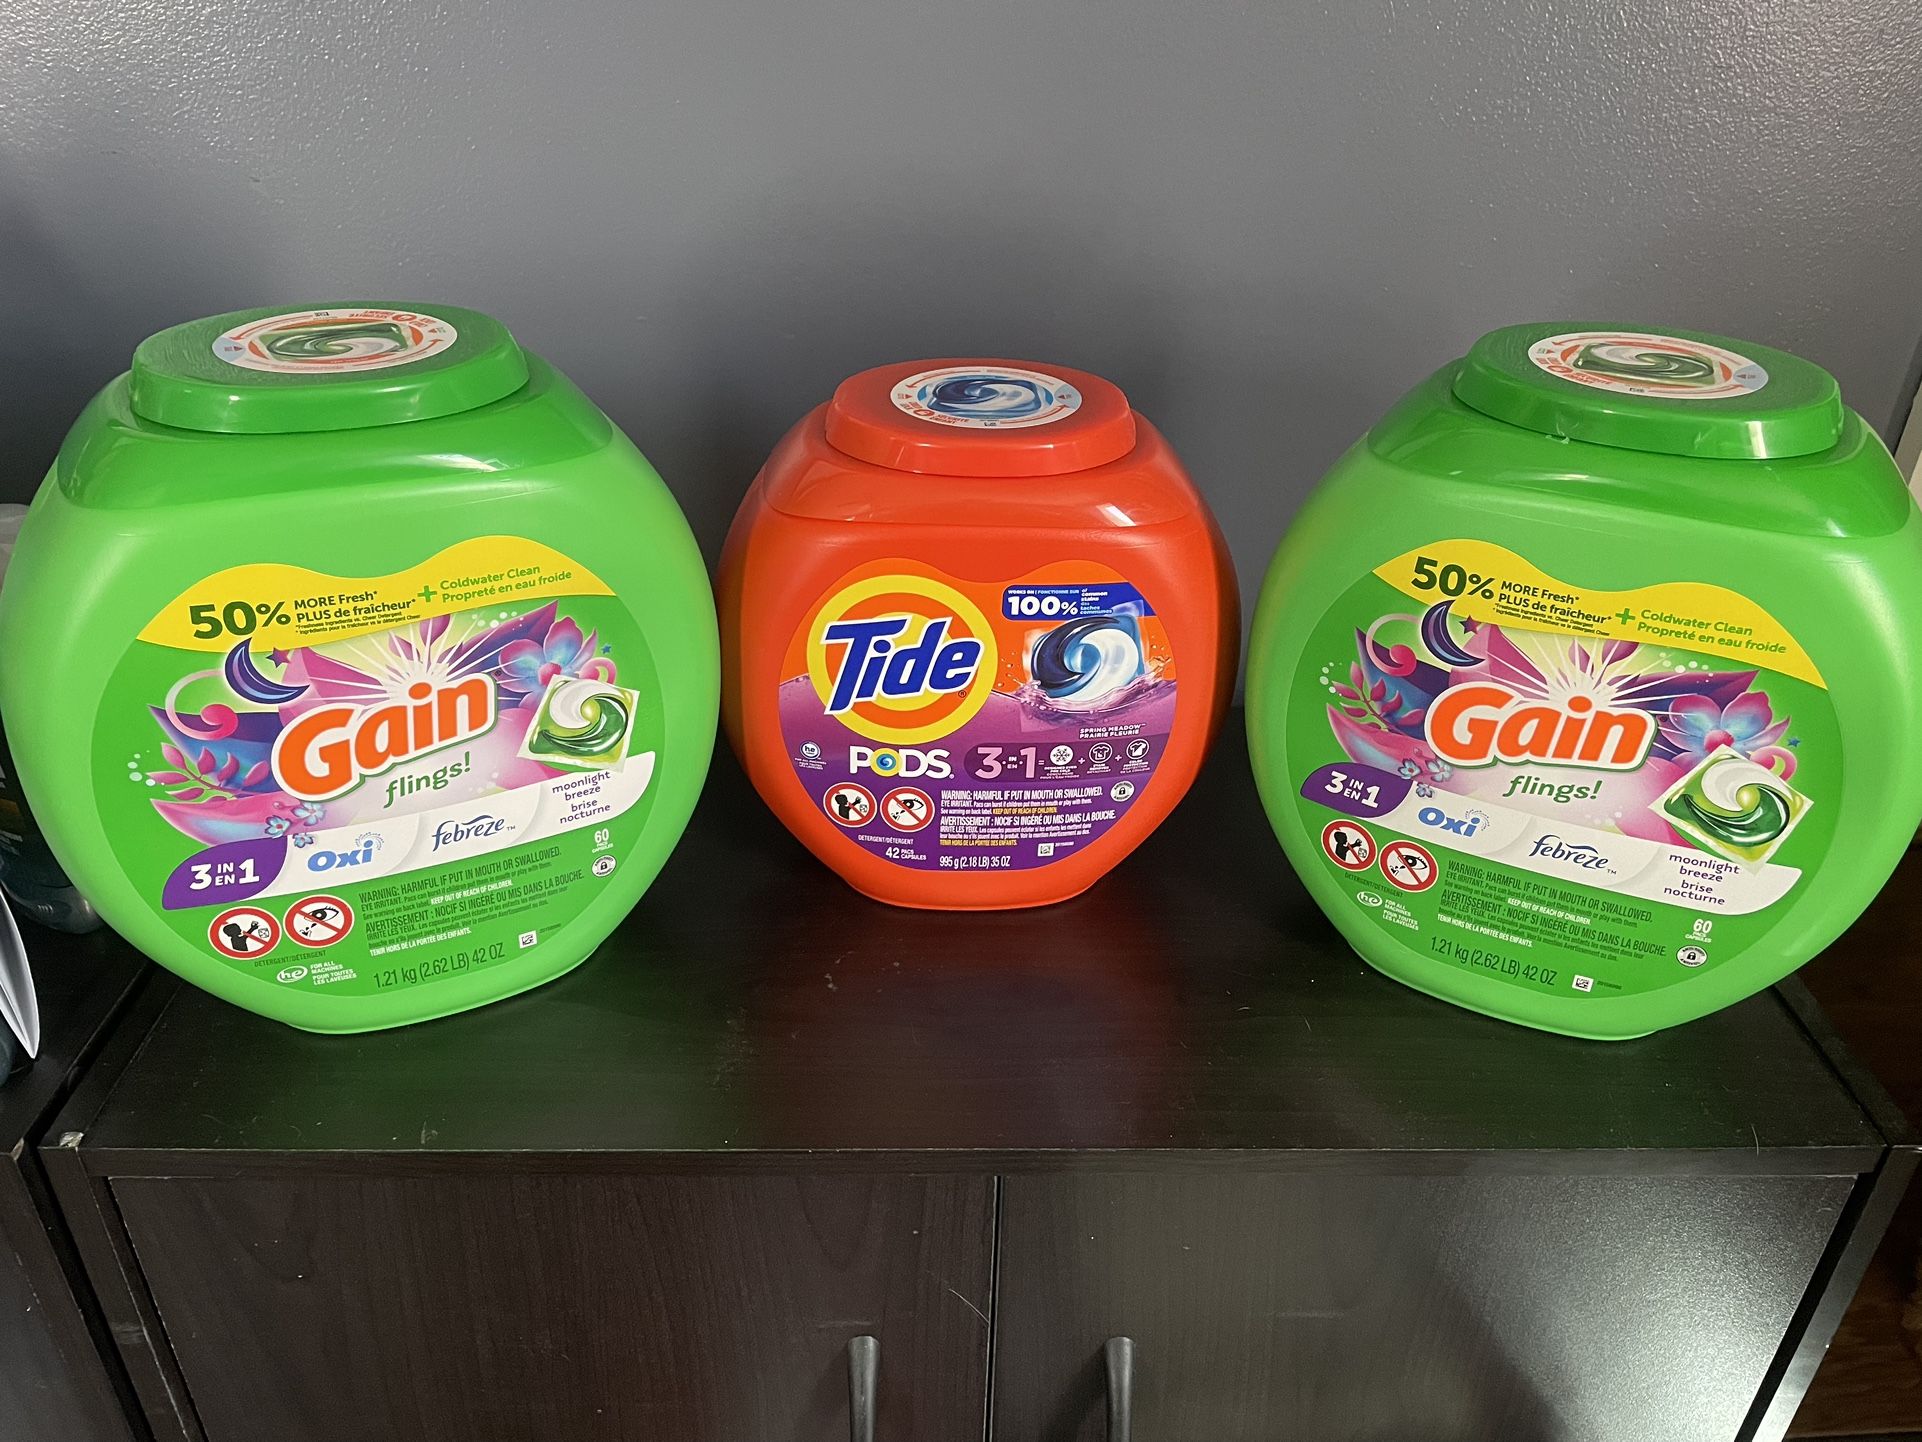 Laundry Pods, Gain And Tide